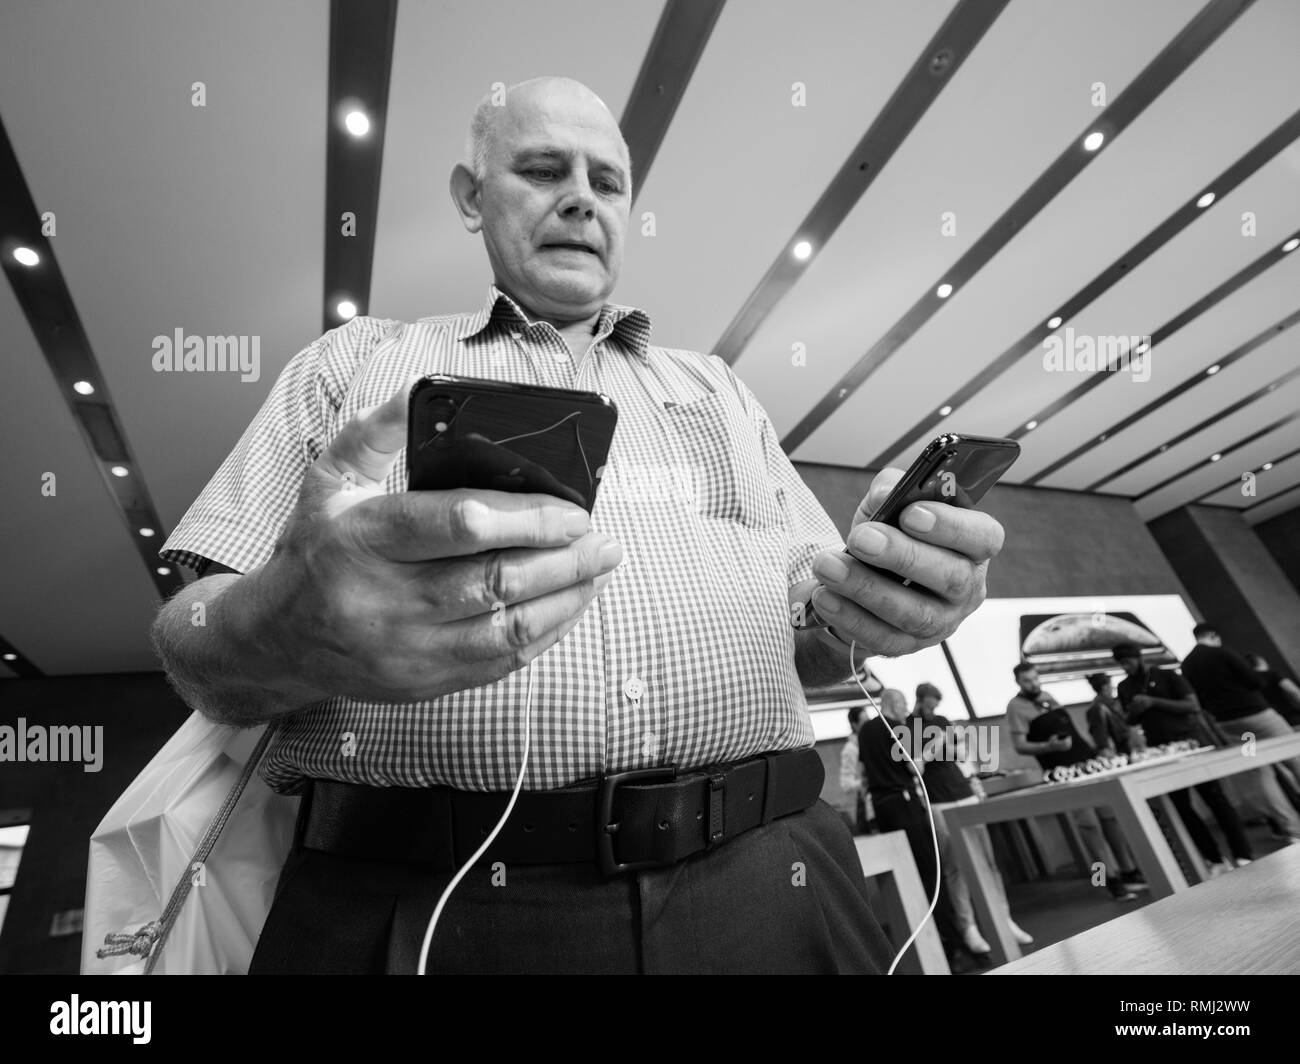 STRASBOURG, FRANCE - SEP 21, 2018: Apple Store with ahppy senior male customer compare buying admiring the new latest iPhone Xs and Xs Max pre order for Xr and Watch Series 4 wearable - black and white Stock Photo